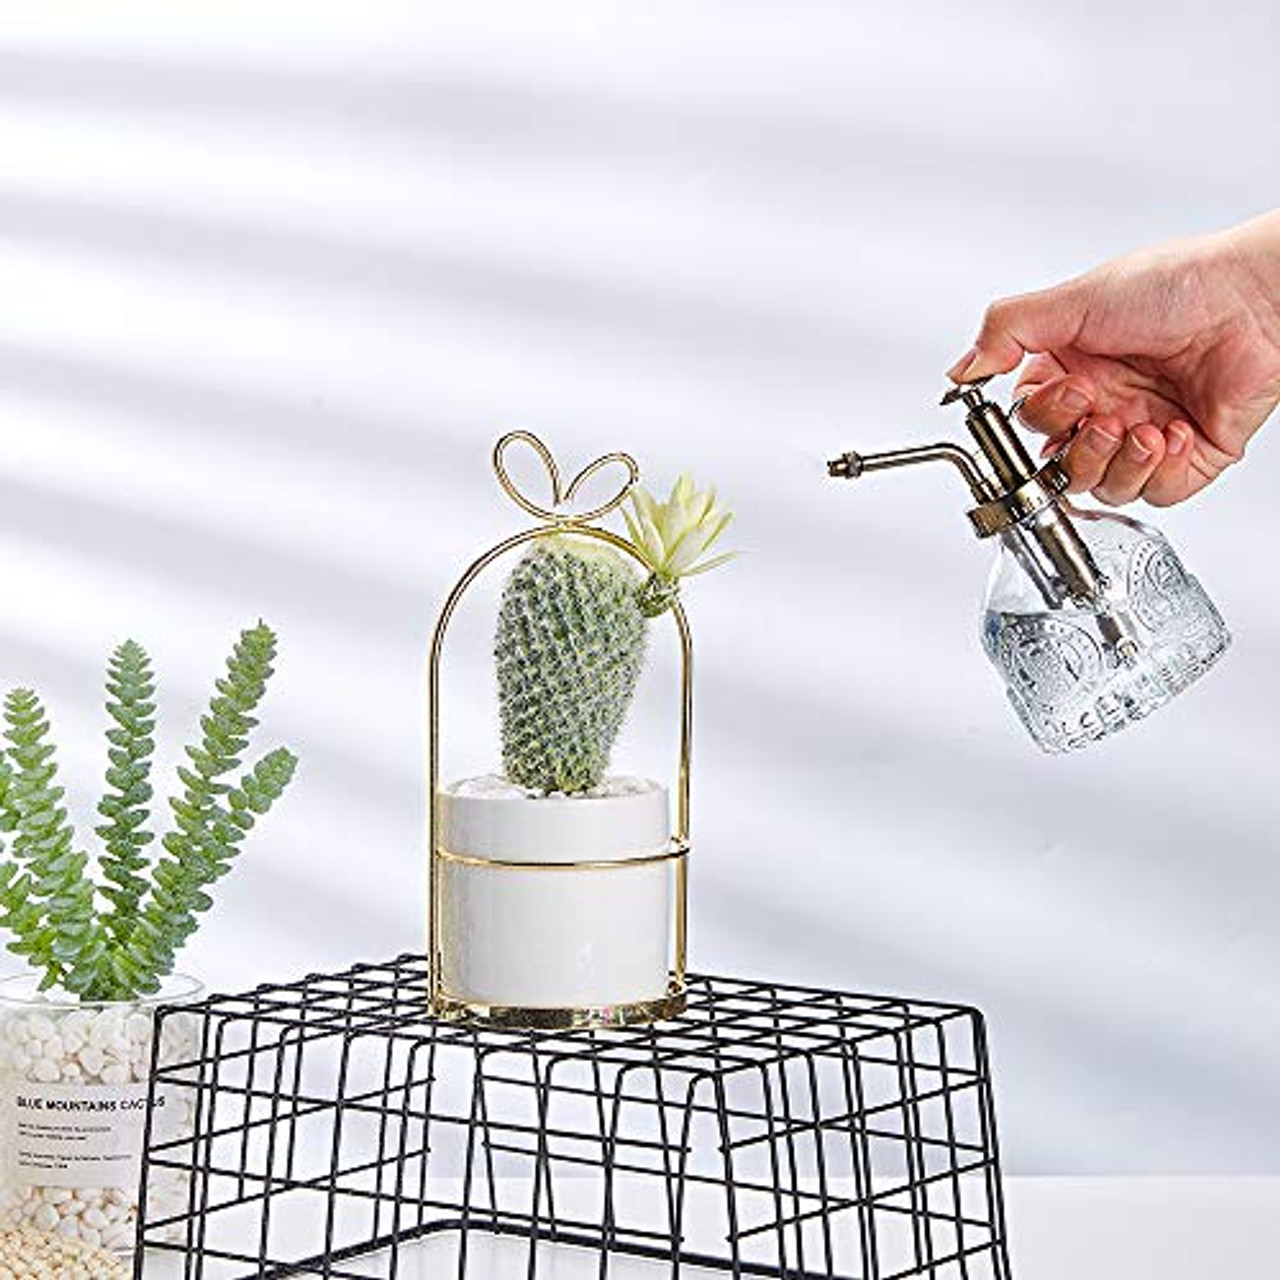 Plant Mister 6.5 Tall Decorative Glass Water Spray Bottle with Gold Top Pump Small Watering Can by Ebristar Clear 